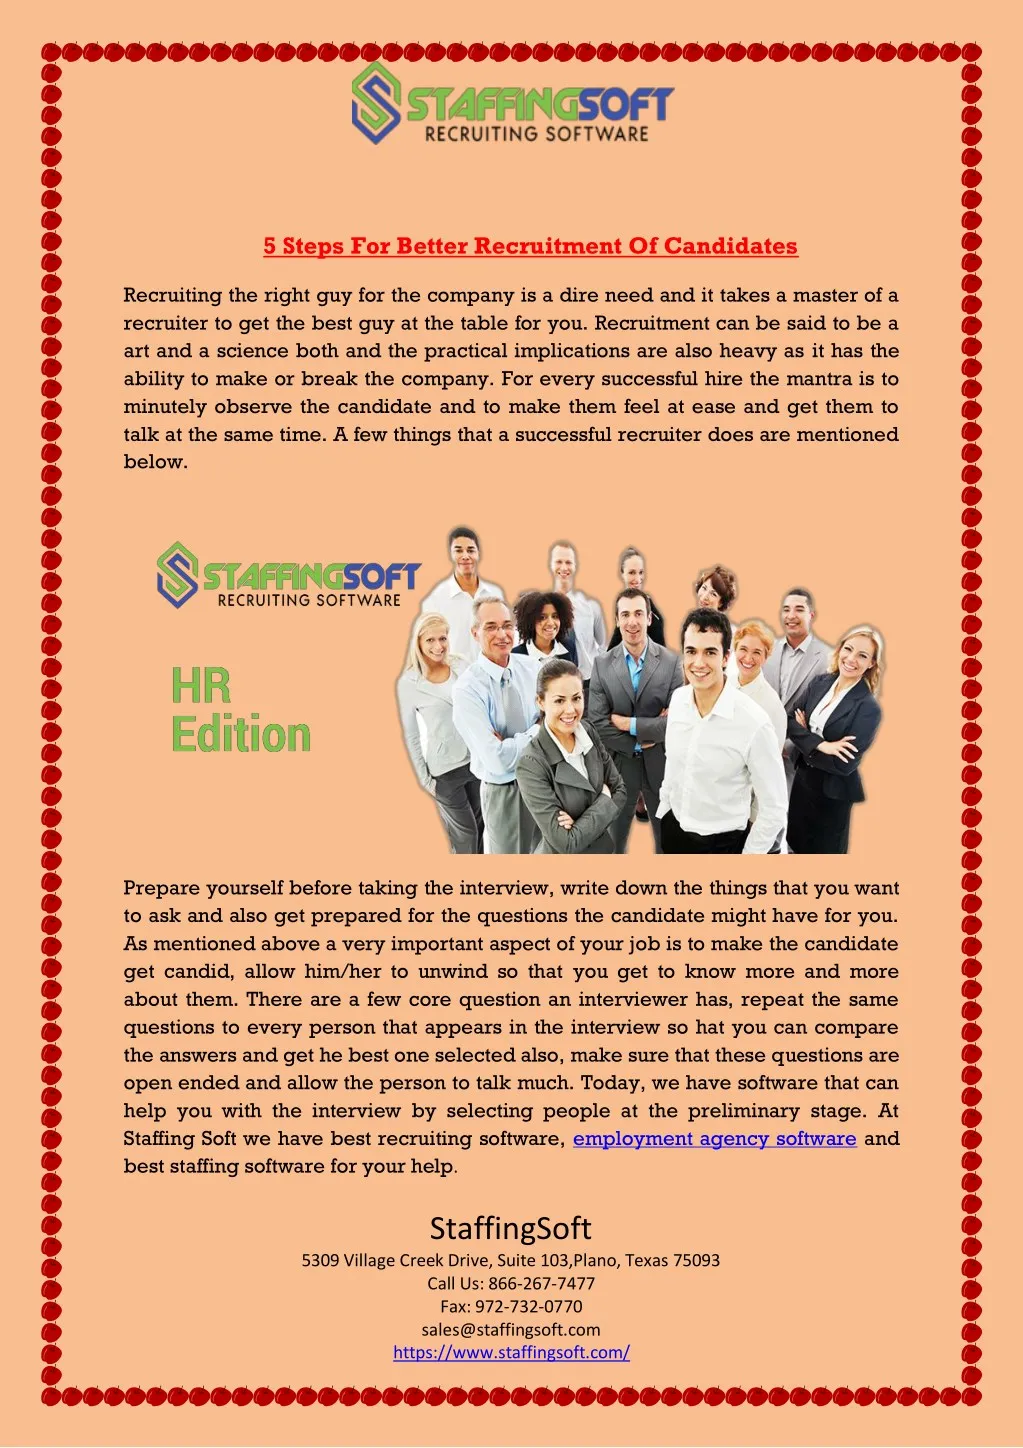 5 steps for better recruitment of candidates